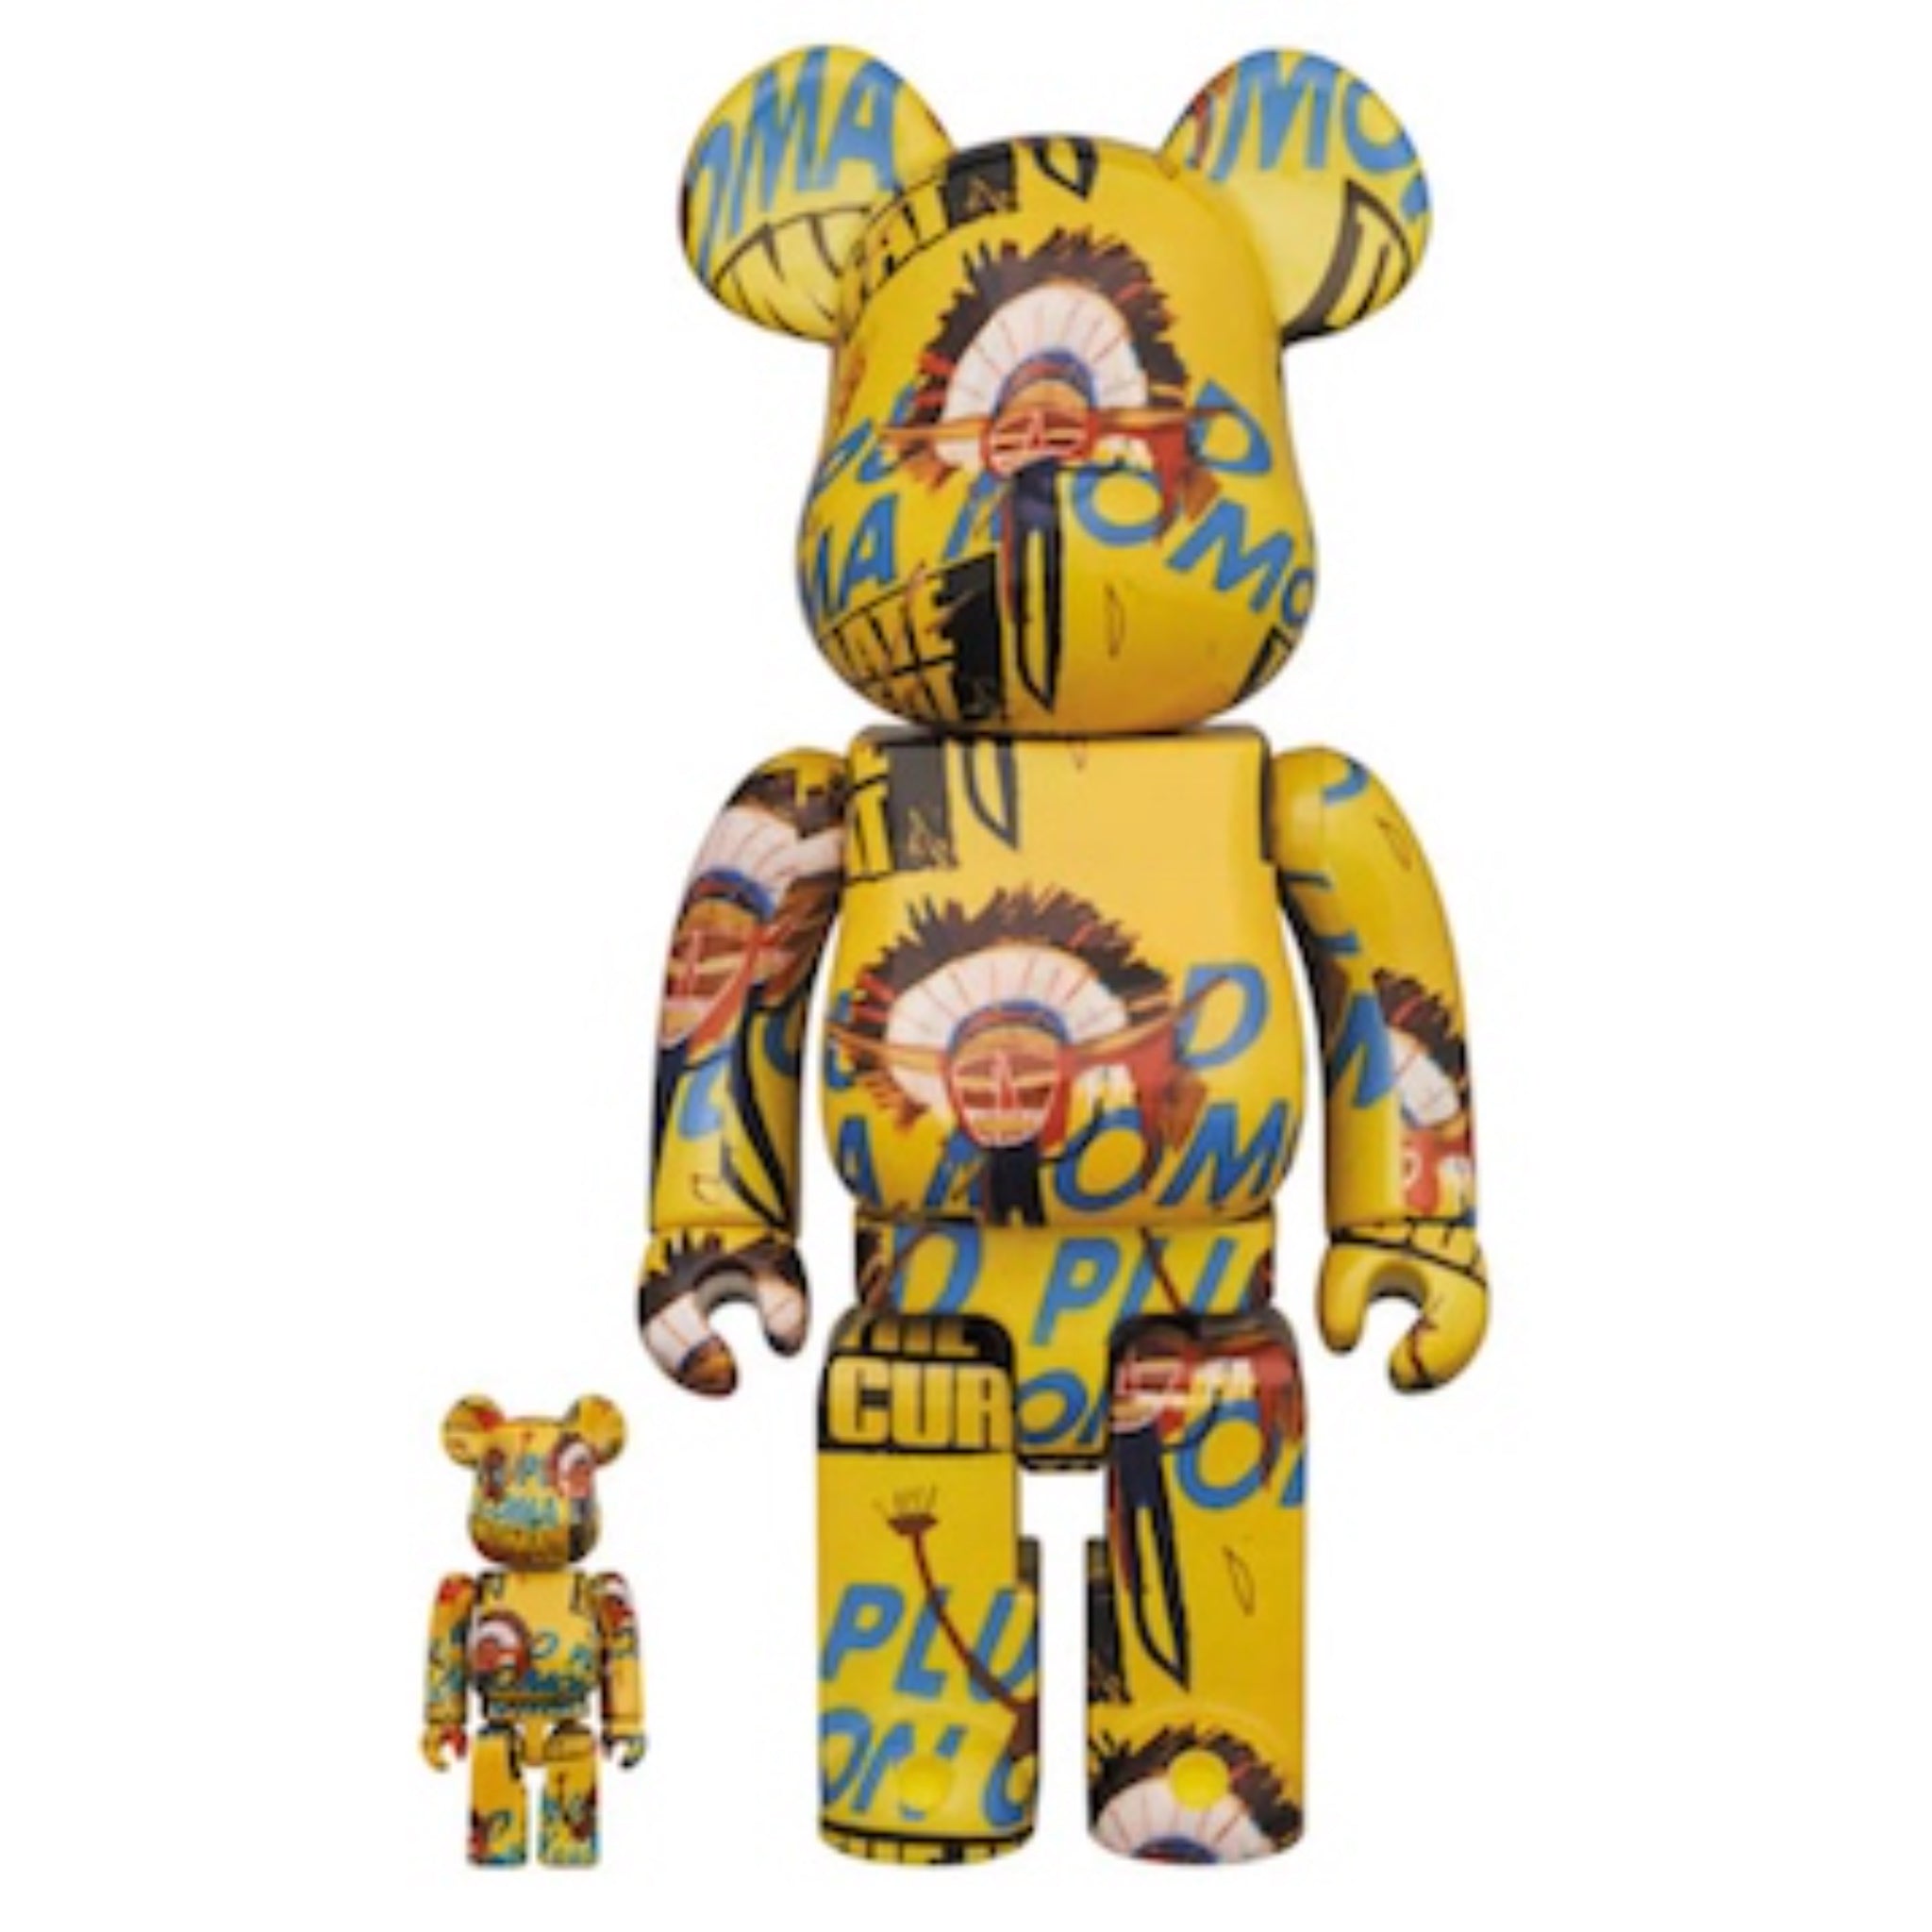 BearBrick Andy Warhol x Jean-Michel Basquiat #3 400% and 100%